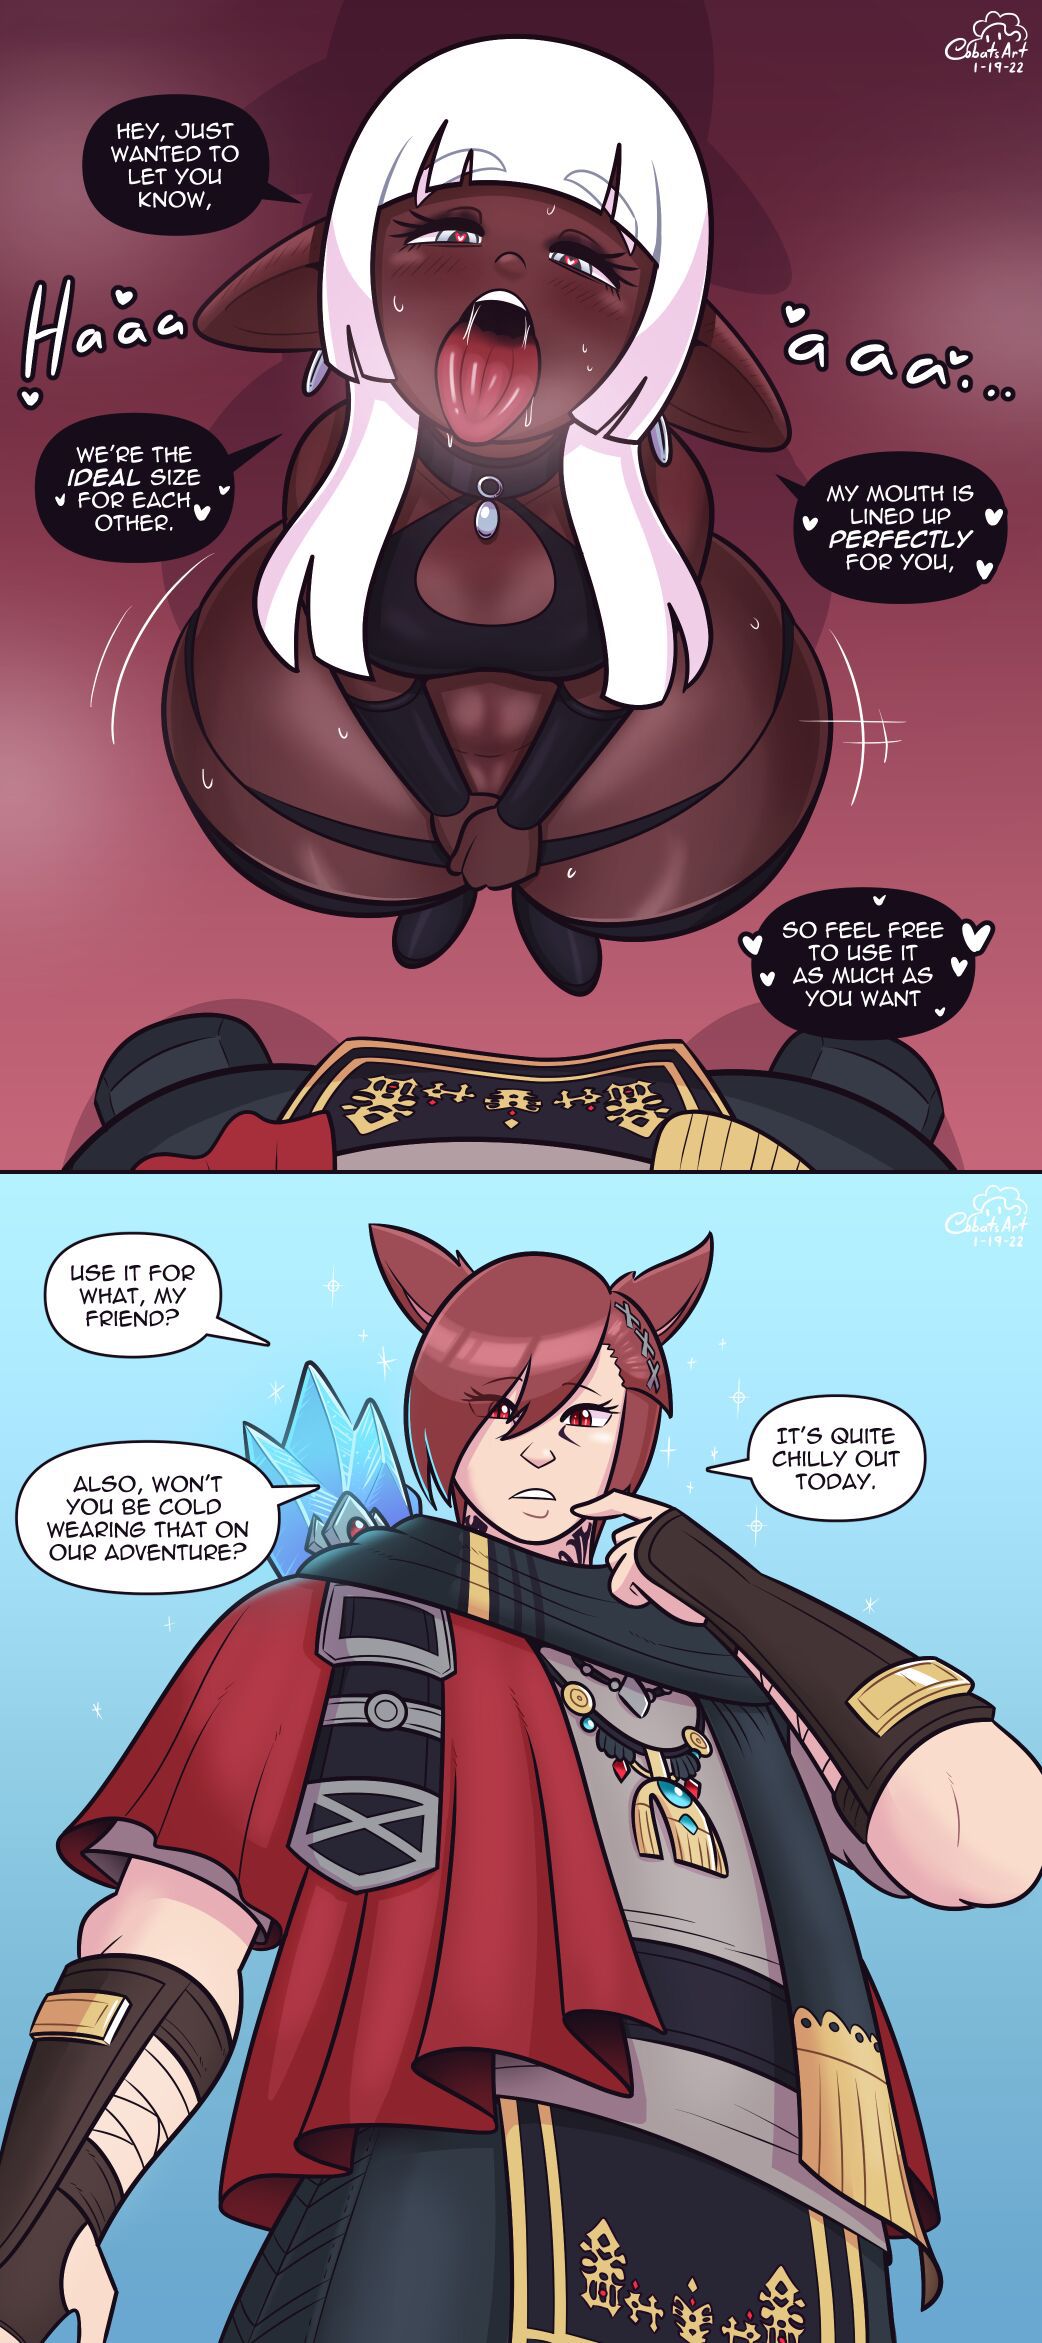 [Cobatsart] Mary Muffin: DRK Chocolate Cake (Final Fantasy XIV) Ongoing 2